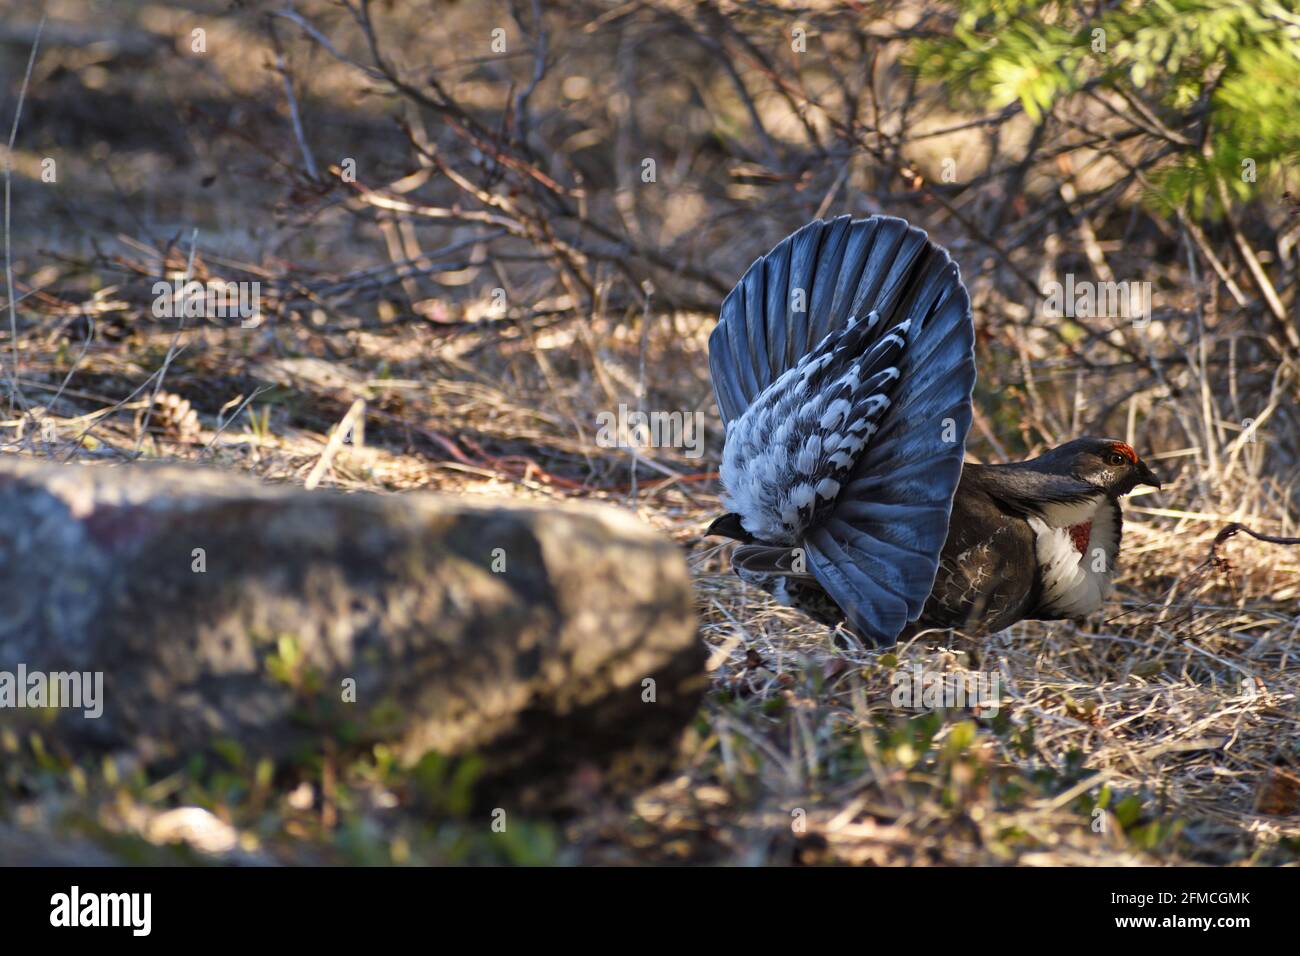 Male dusky grouse showing mating display in spring. Purcell Mountains, northwest Montana. (Photo by Randy Beacham) Stock Photo